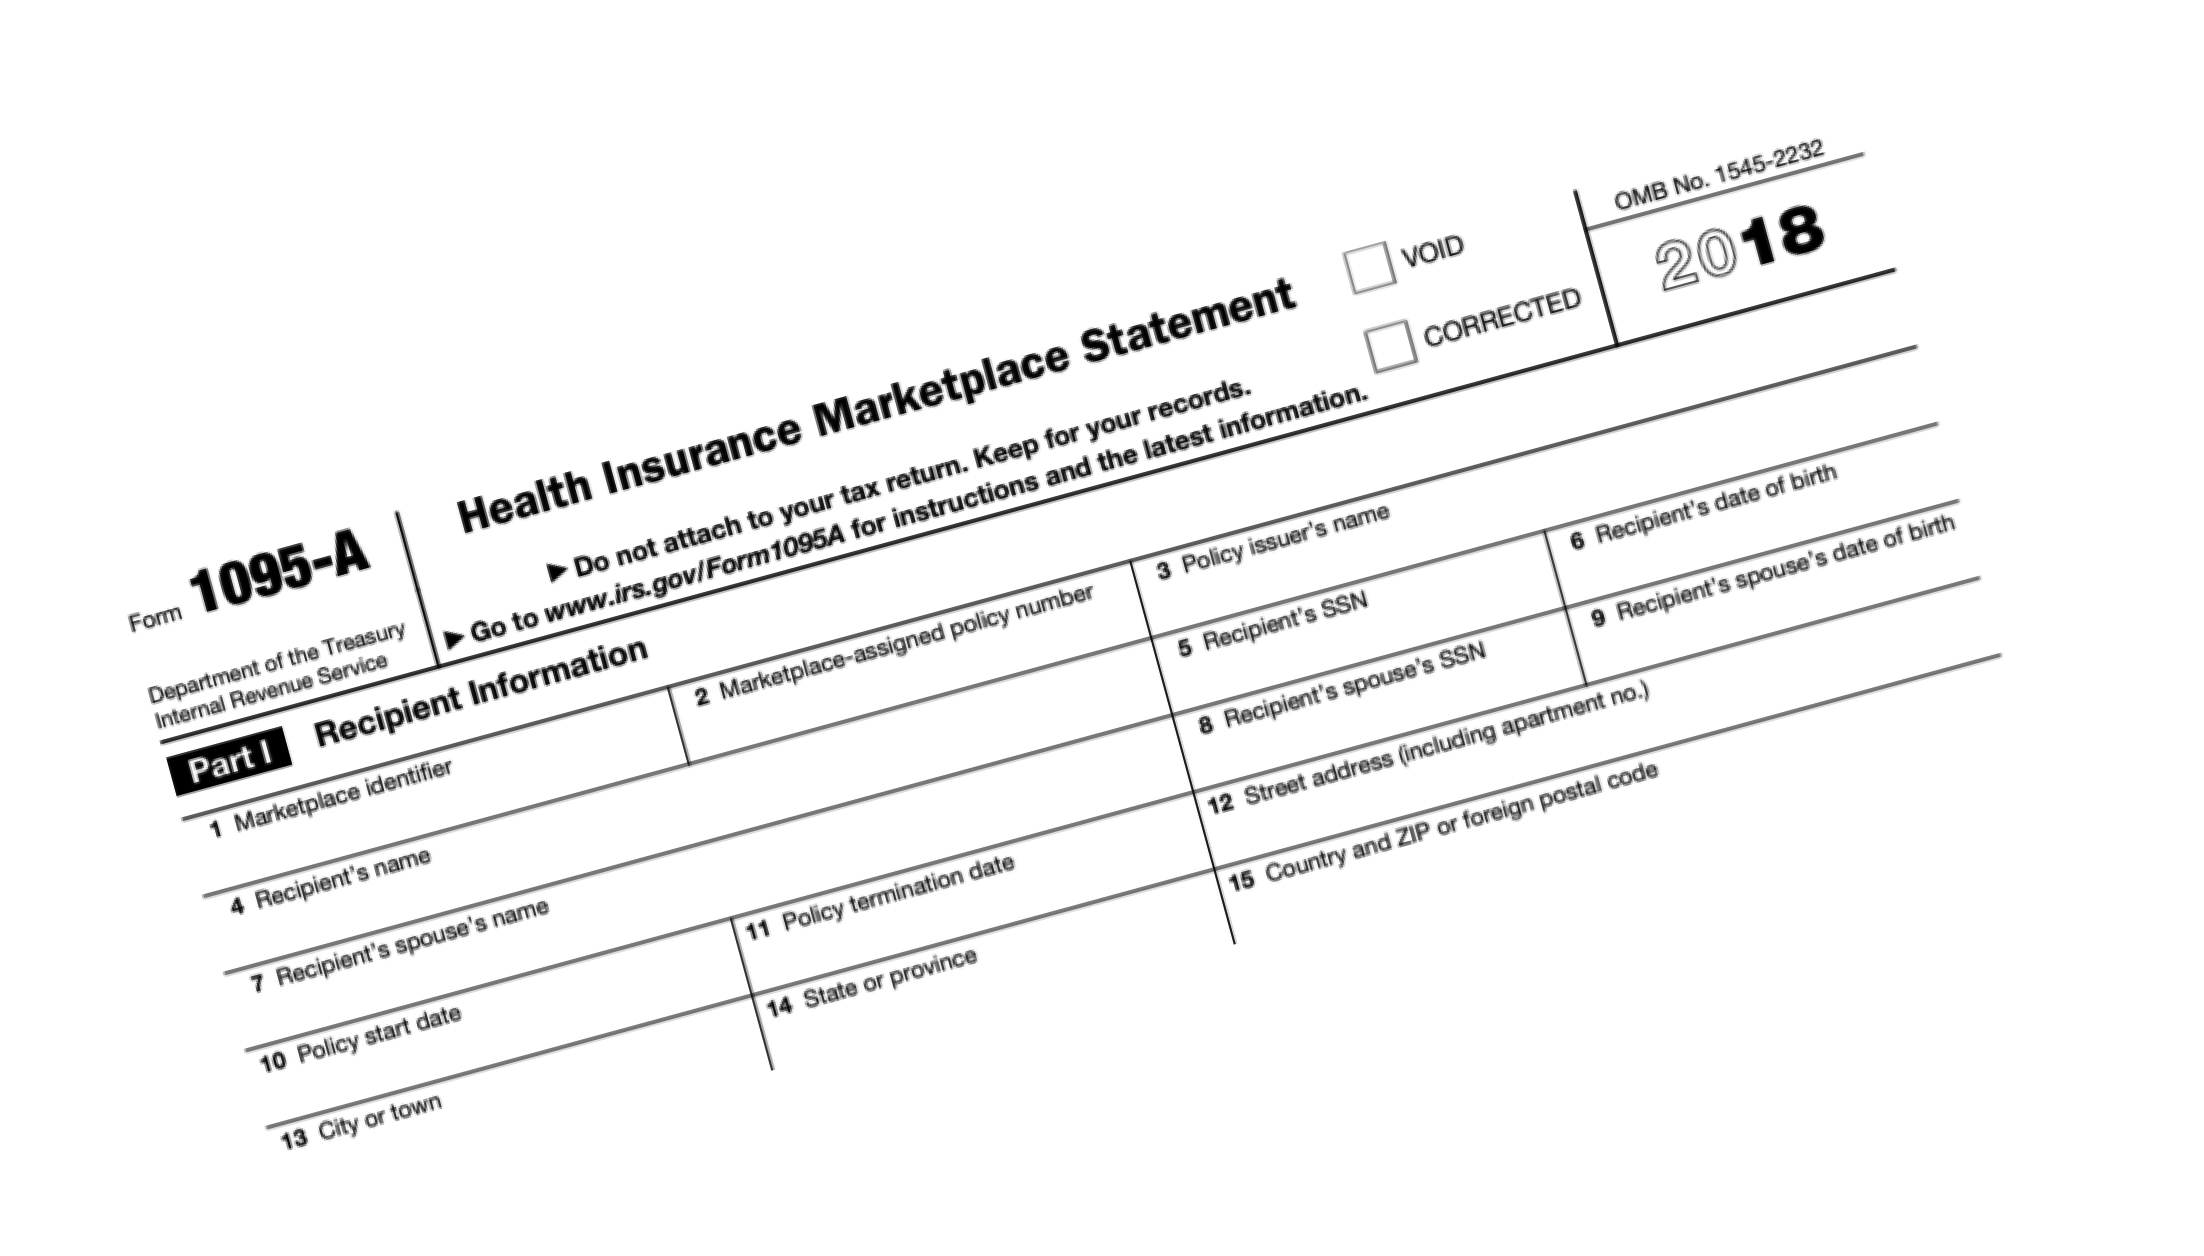 Health insurance marketplace statement form 1095-A 